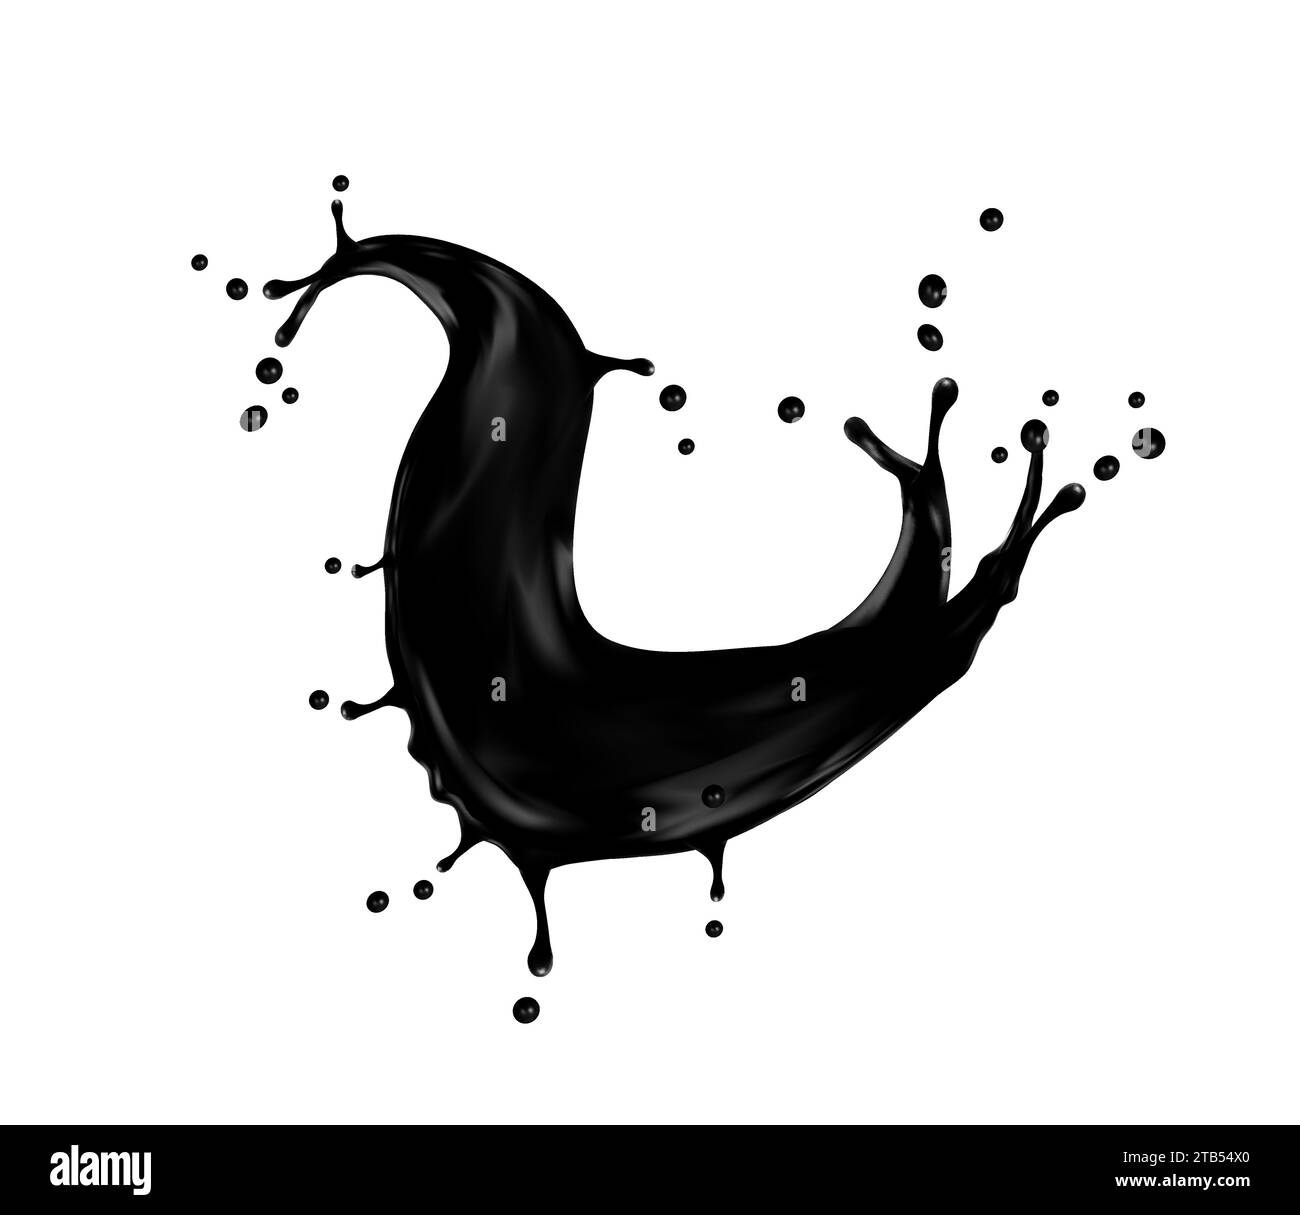 Black oil splash or petrol flow and liquid ink swirl of paint drops splatter, vector background. Black oil wave splash or spill pour of abstract drips and ink droplets swirl, isolated on white Stock Vector